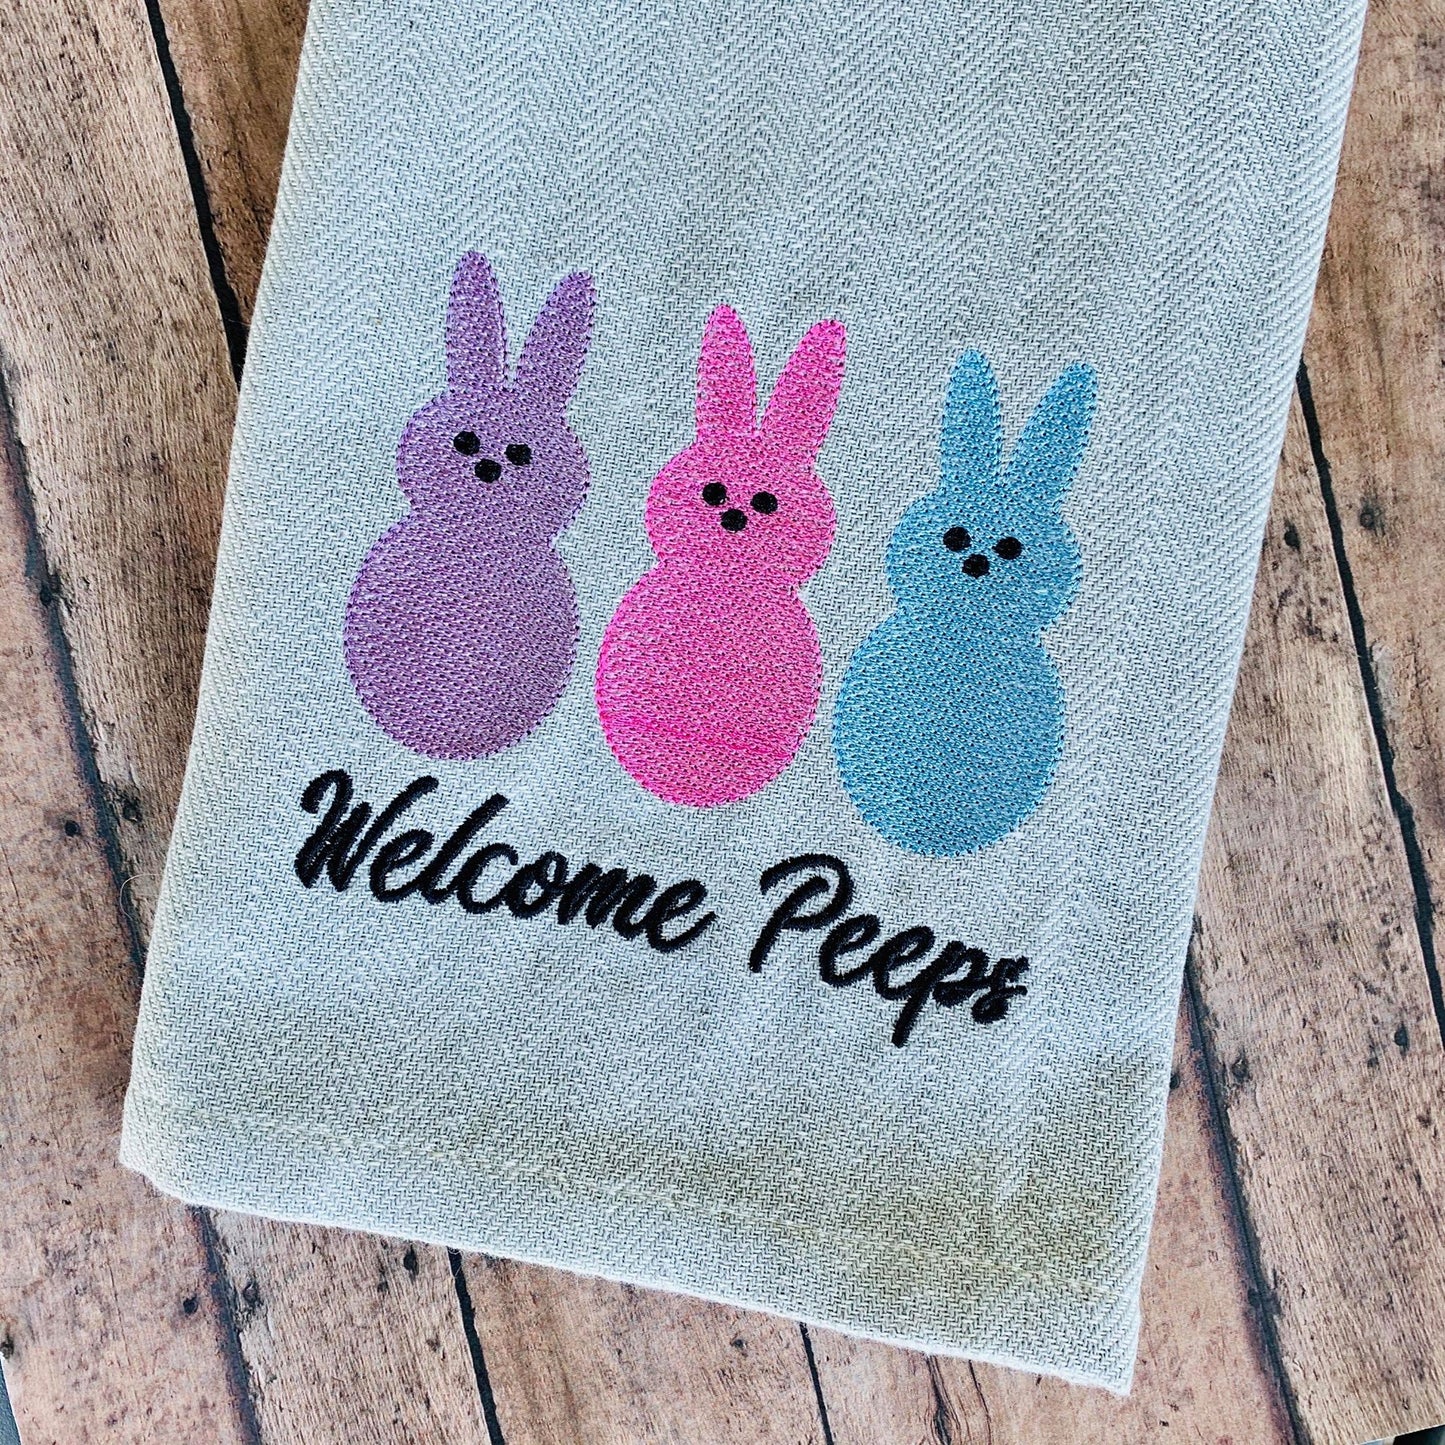 Welcome Peeps - 3 sizes - Digital Embroidery Design